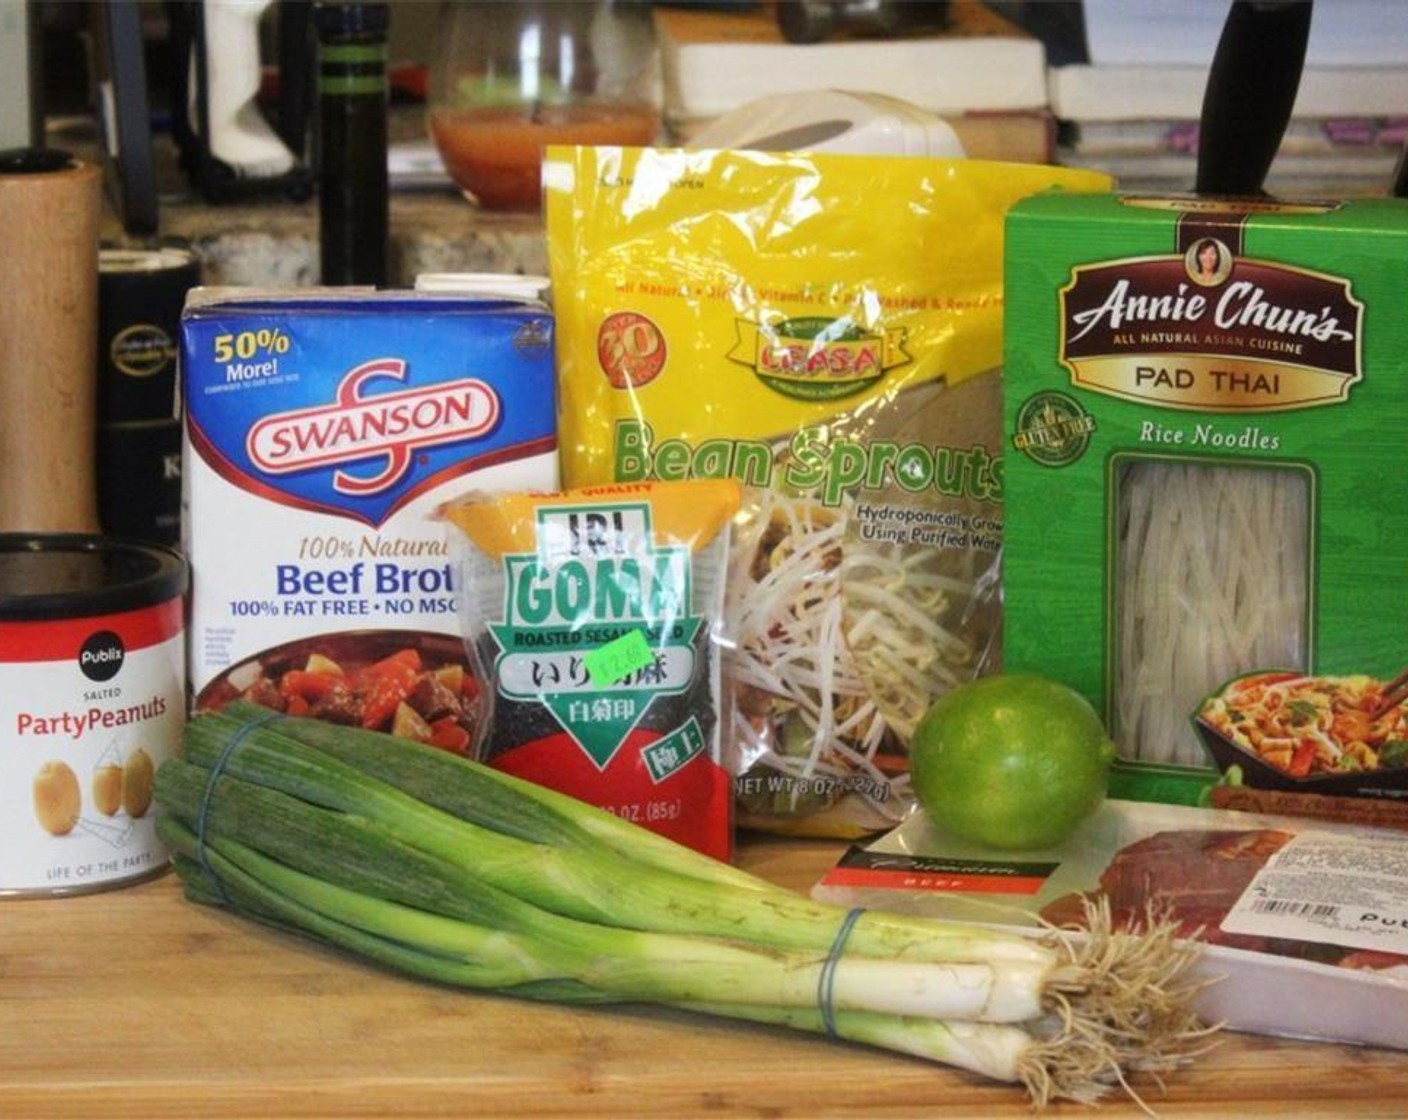 step 1 Cook the Rice Noodles (8 oz) according to package instructions, drain and set aside.